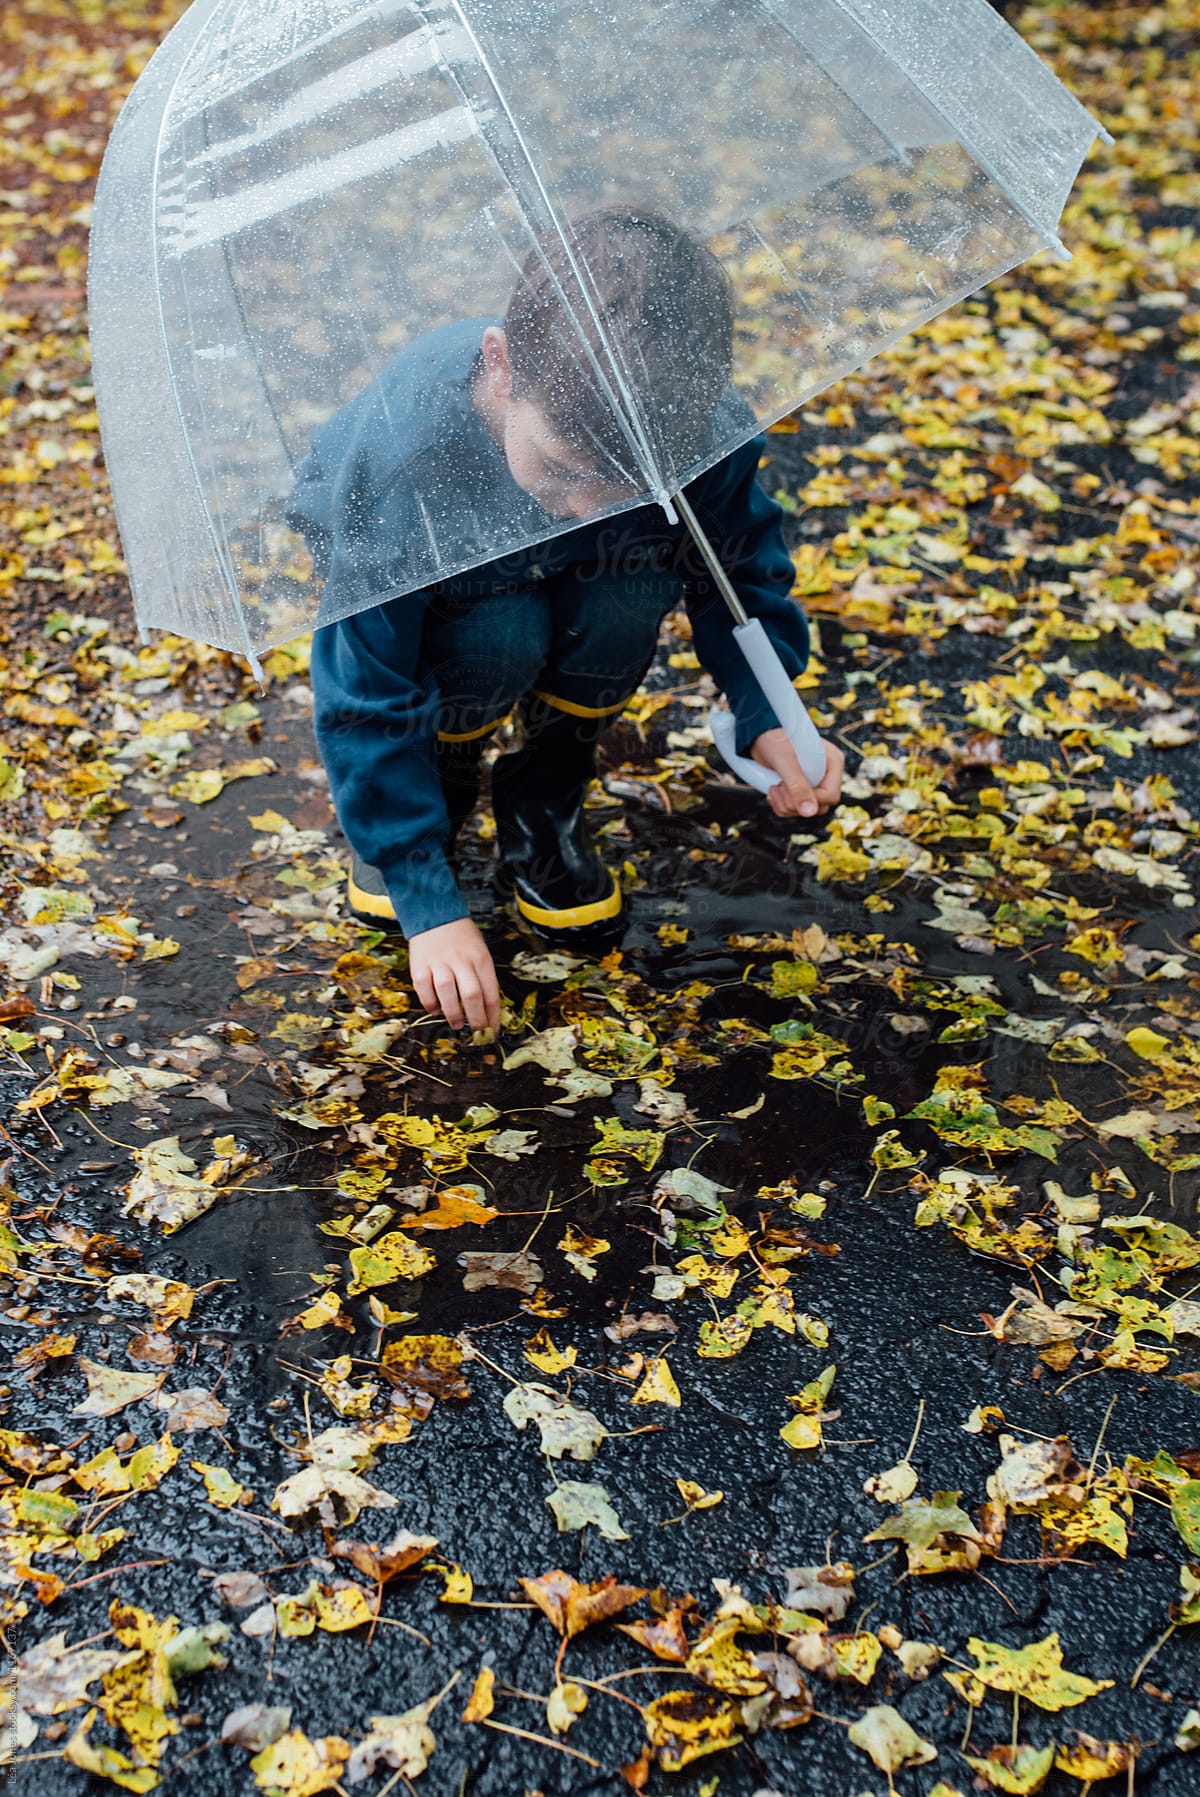 little boy with umbrella in the rain, yellow leaves on the ground